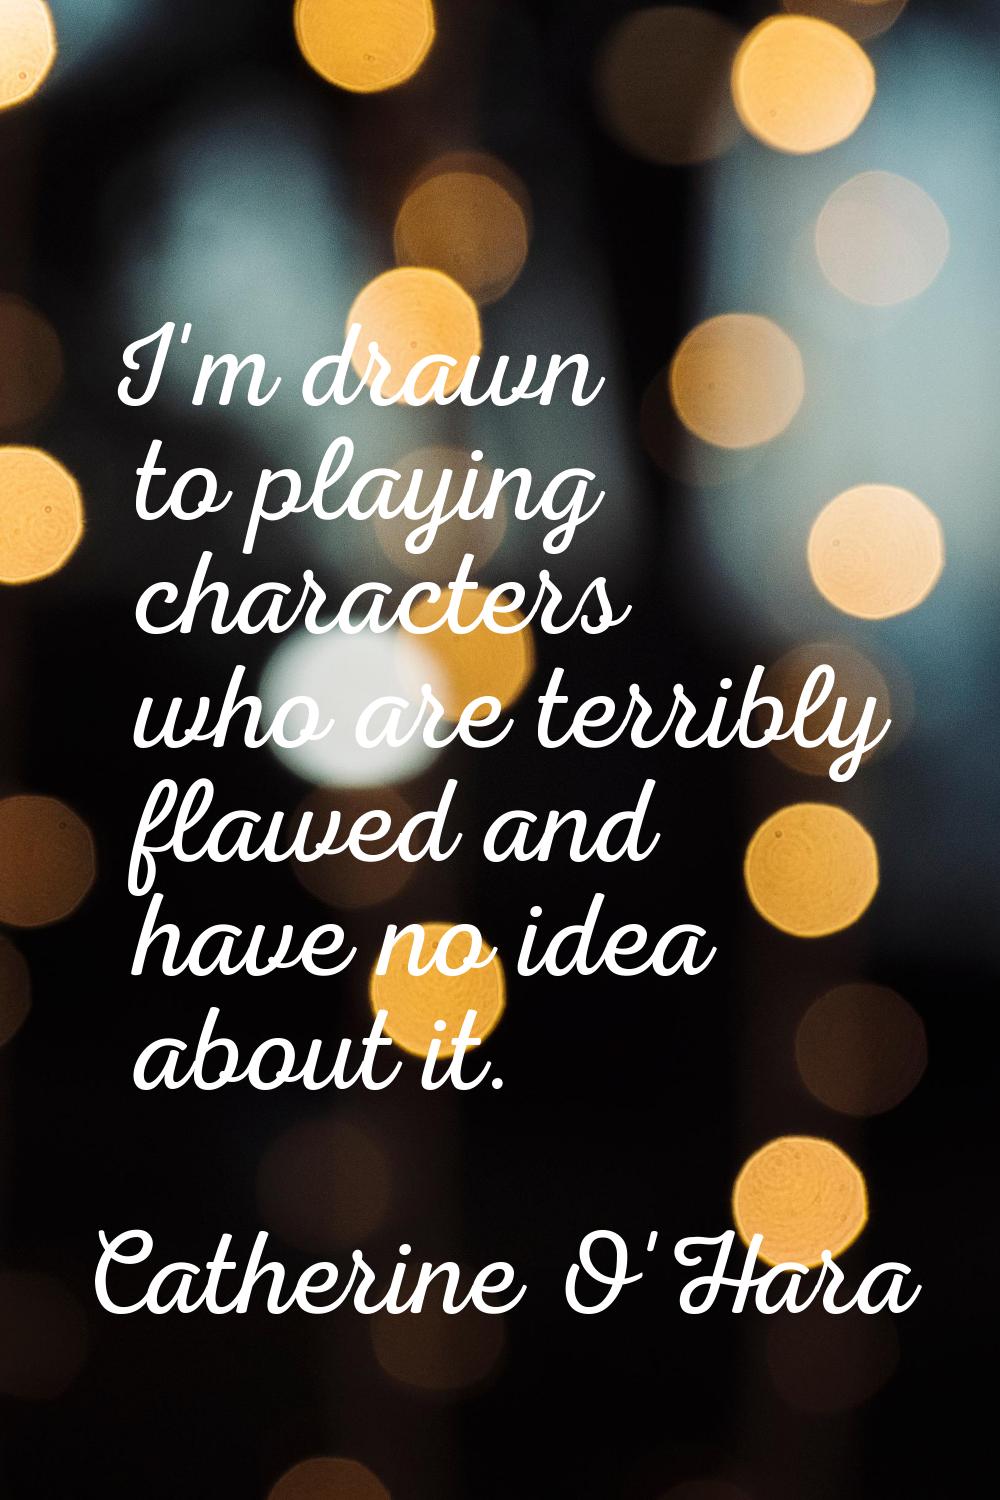 I'm drawn to playing characters who are terribly flawed and have no idea about it.